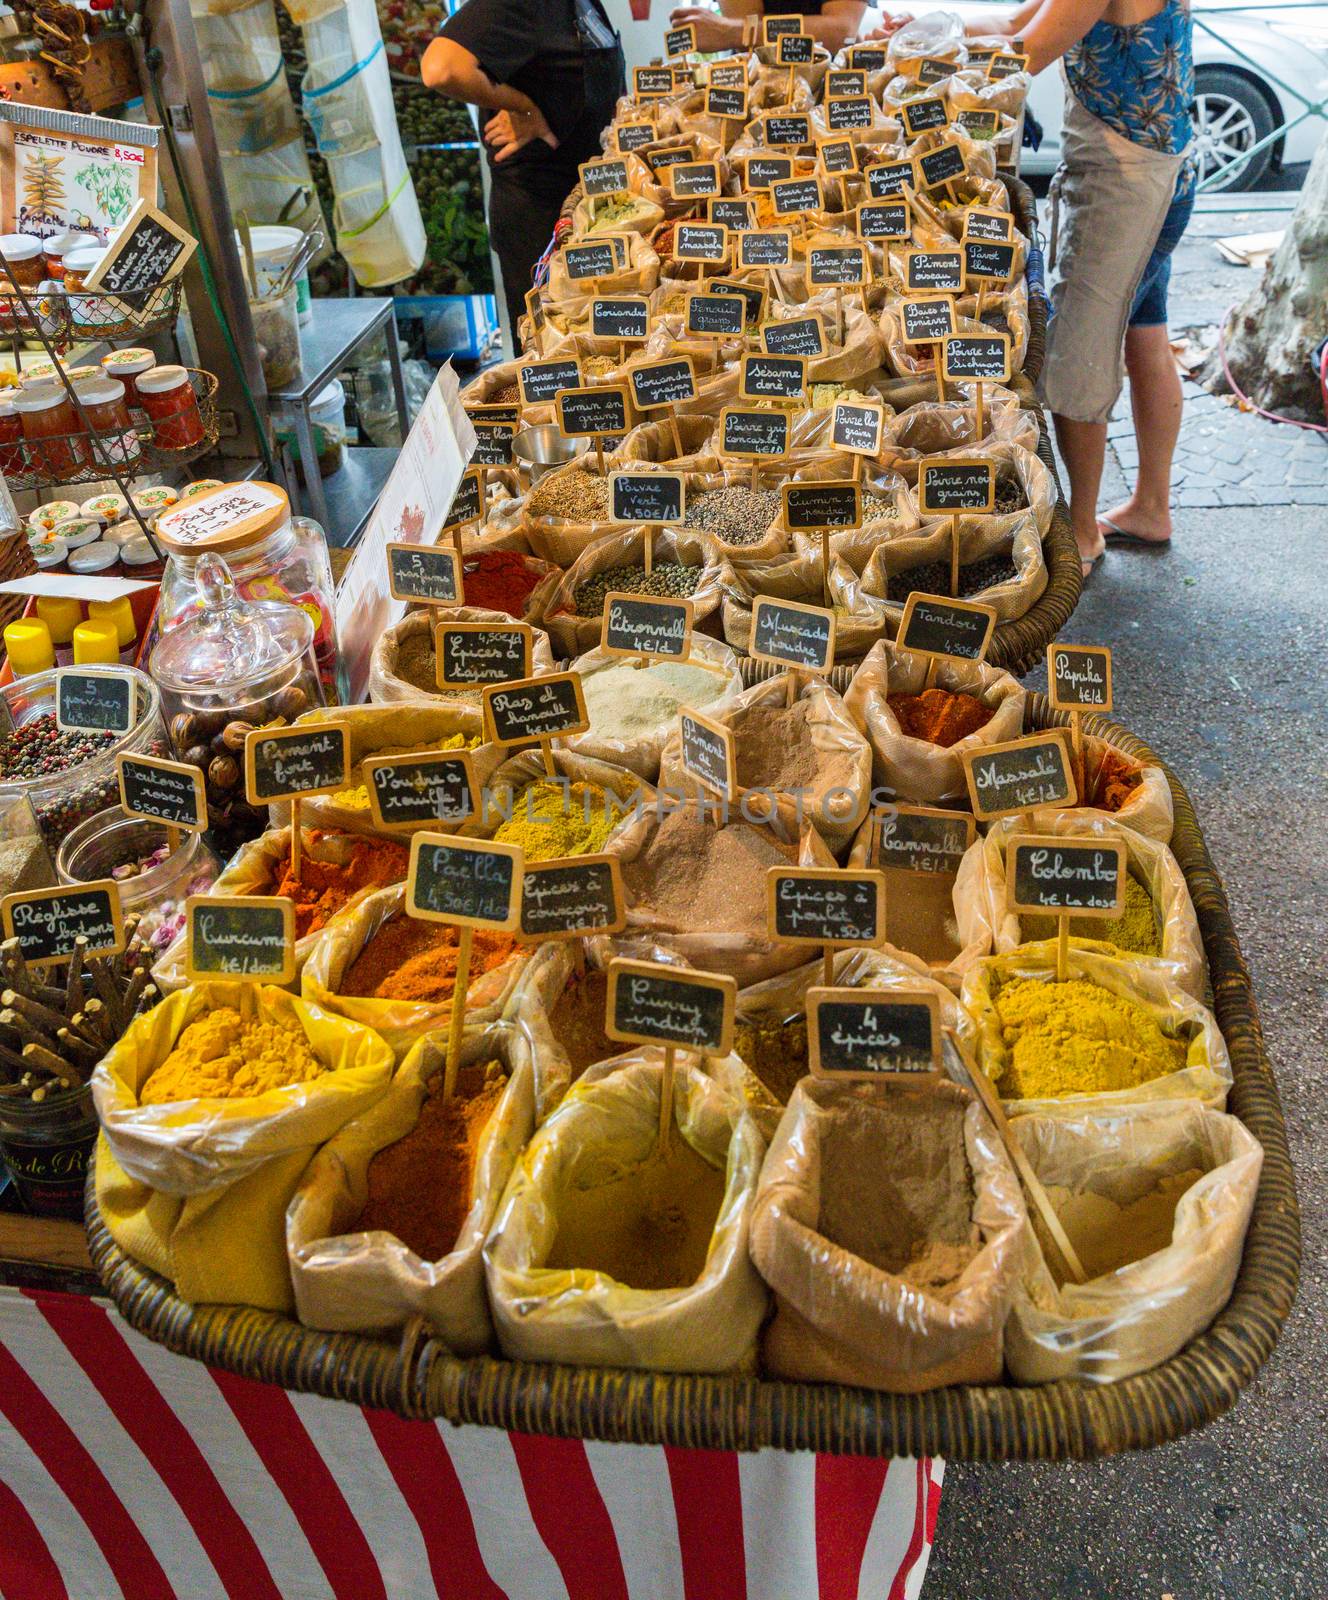 Market stall in the South of France by chrisukphoto